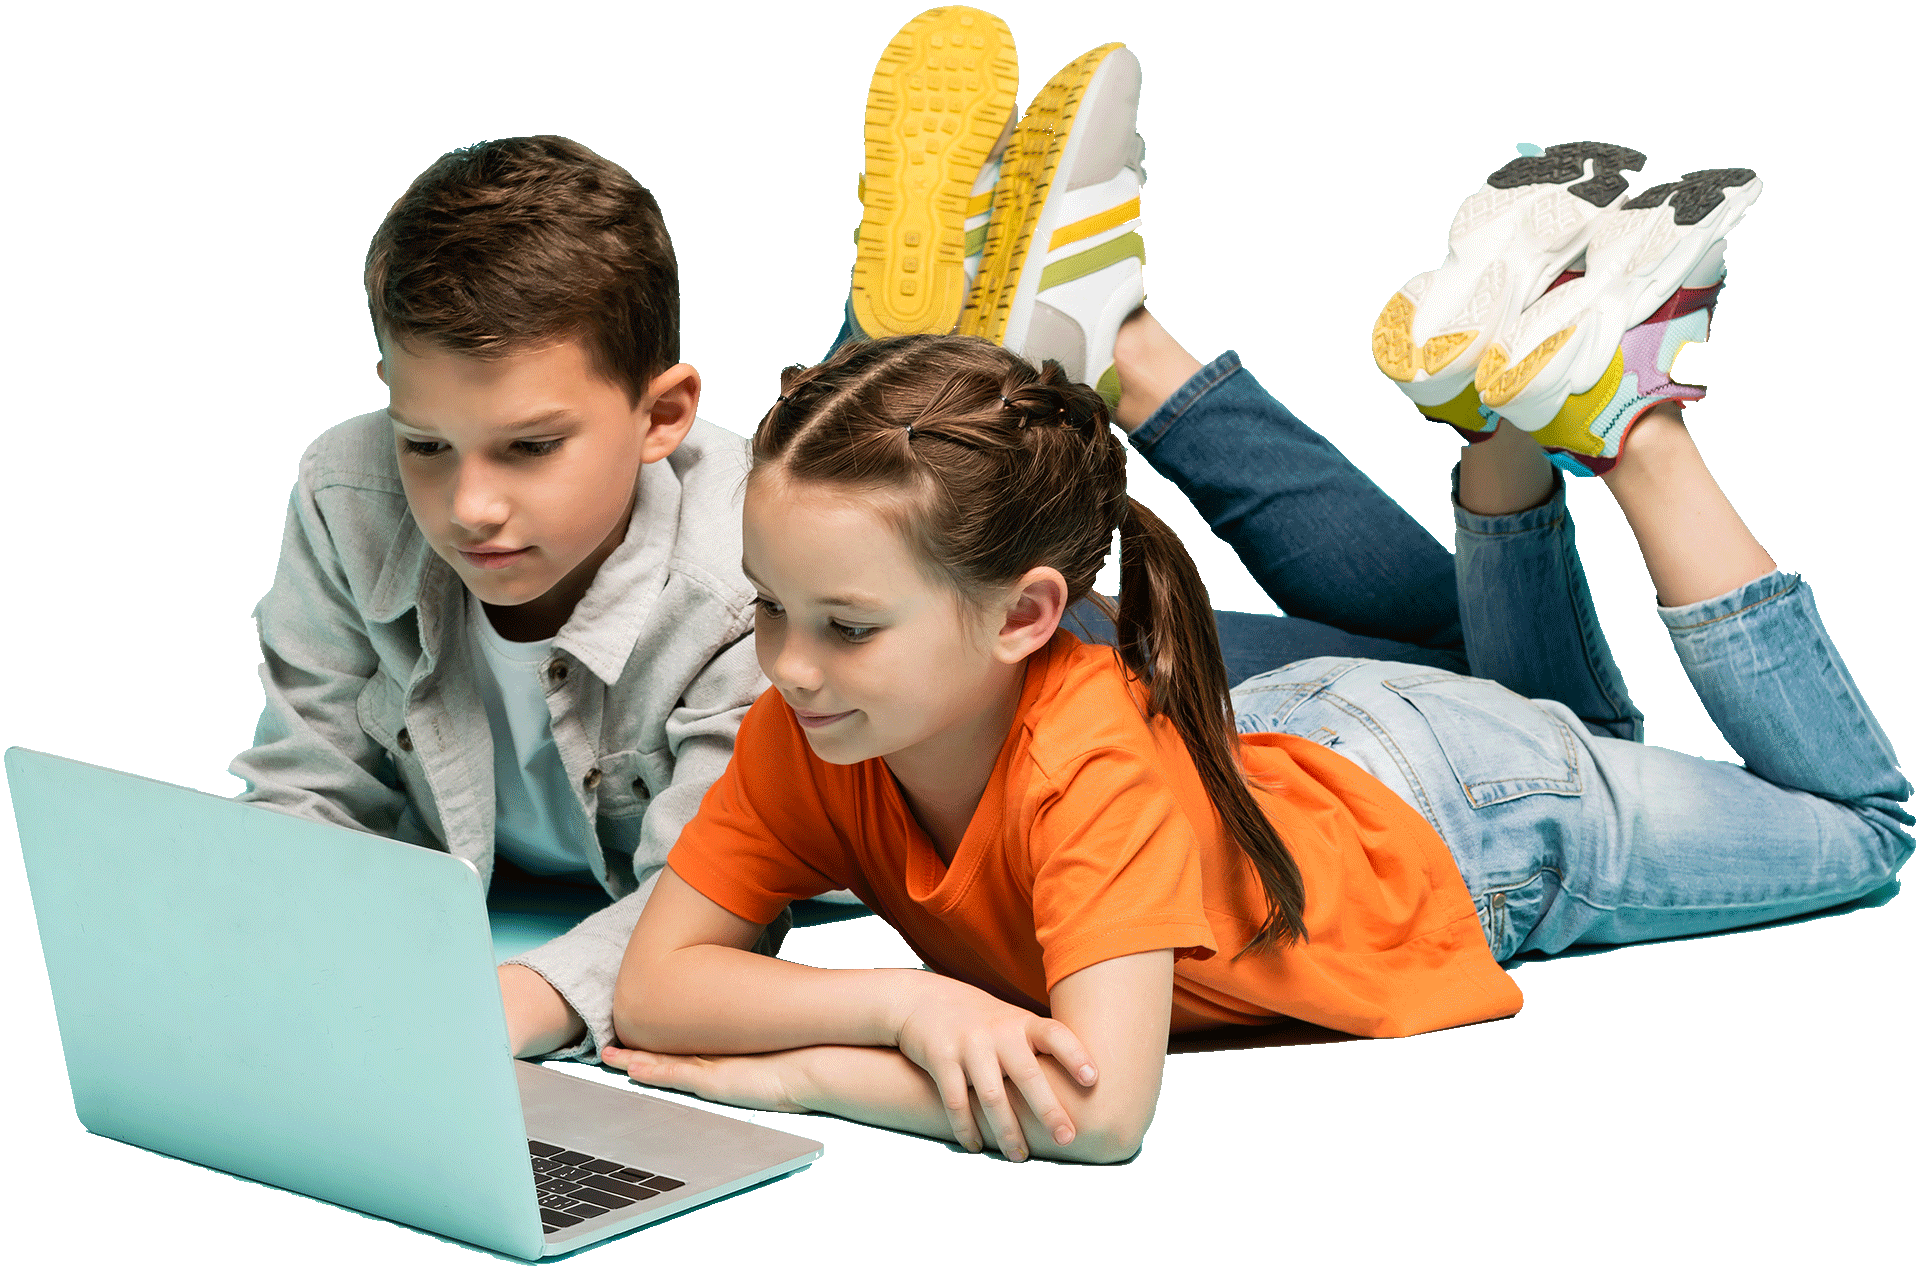 Boy and Girl using a laptop